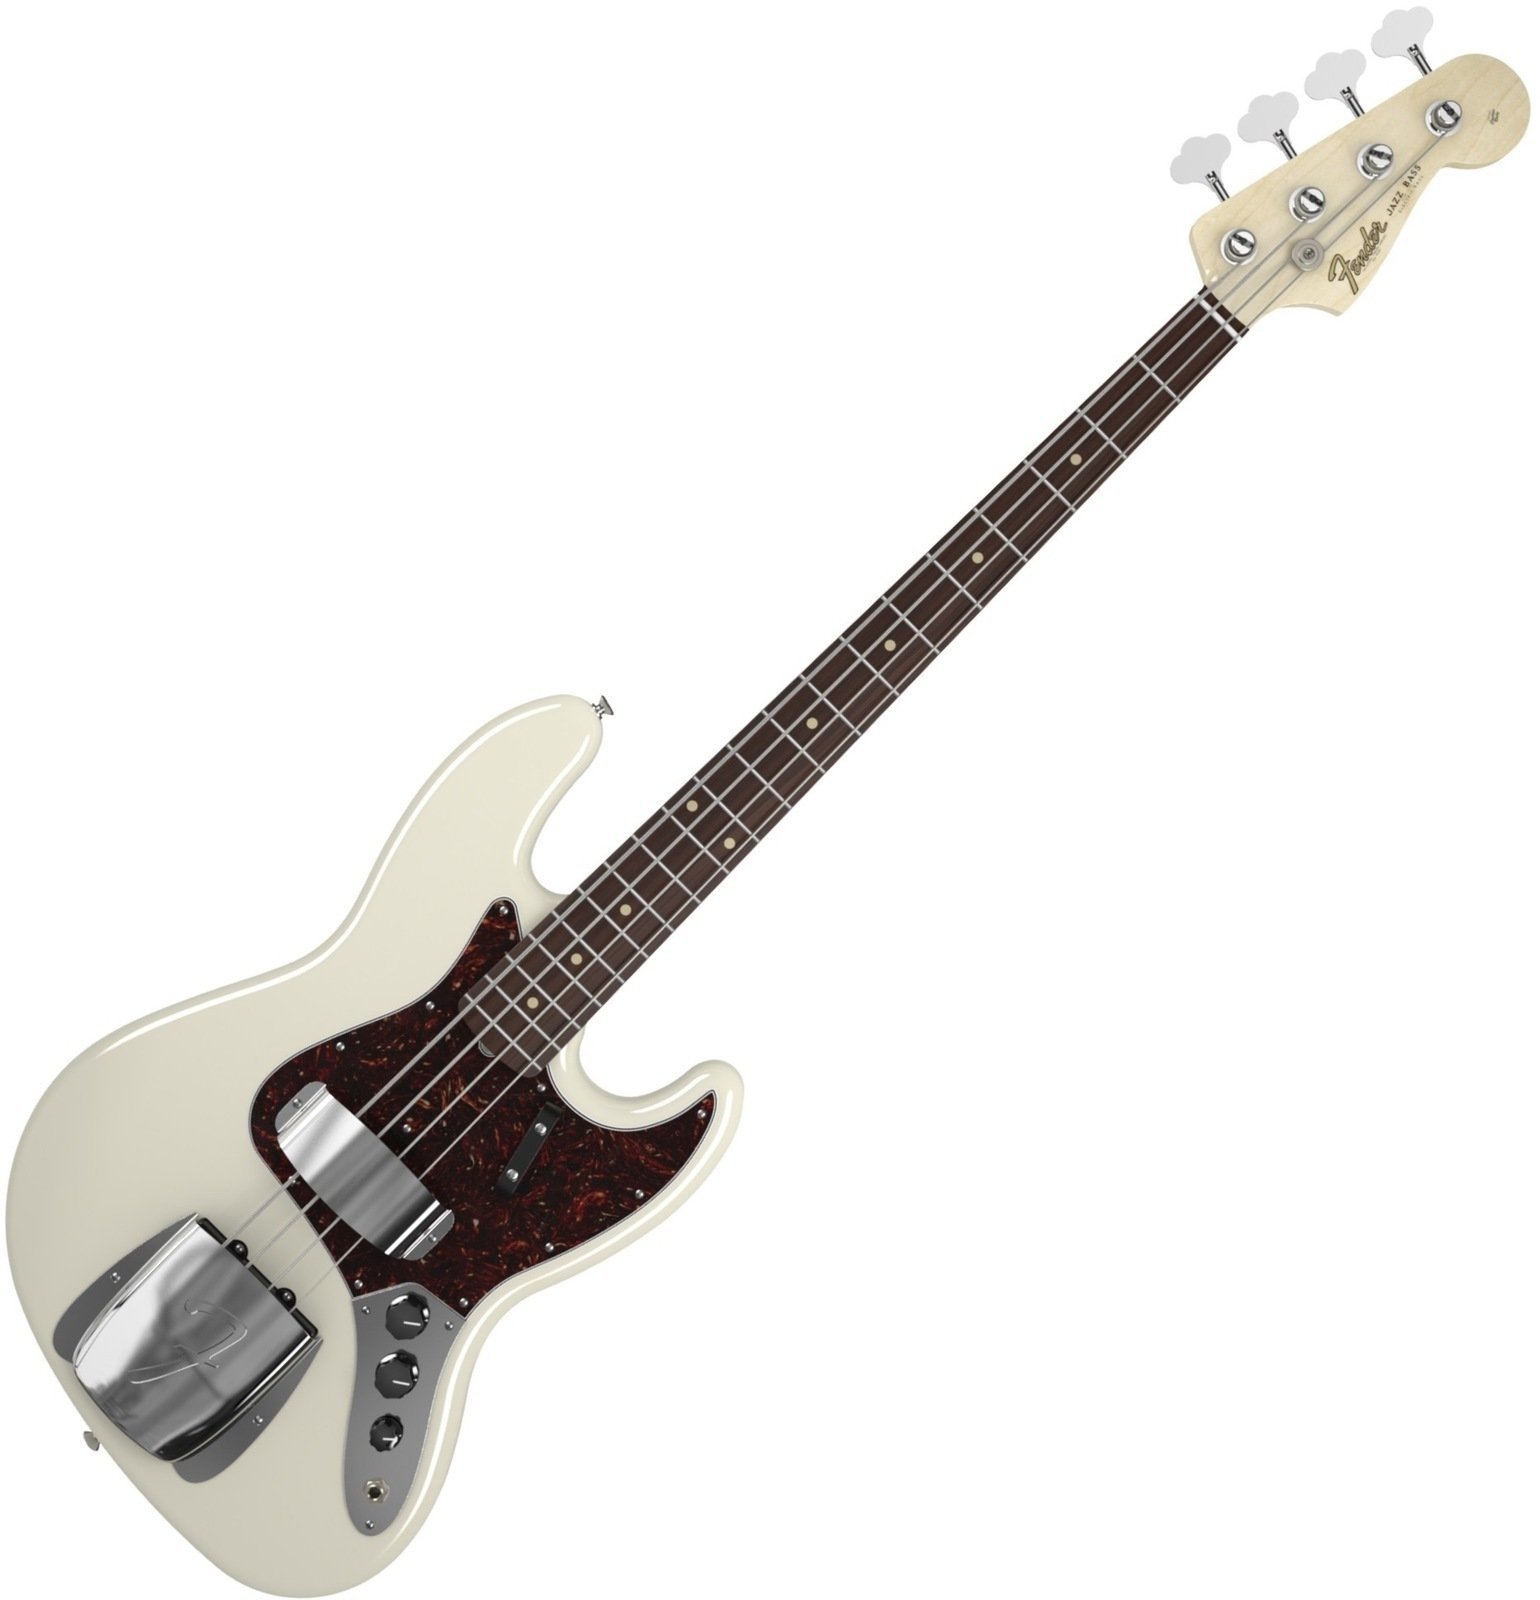 E-Bass Fender American Vintage '64 Jazz Bass, Round-Laminated Rosewood Fingerboard, Olympic White